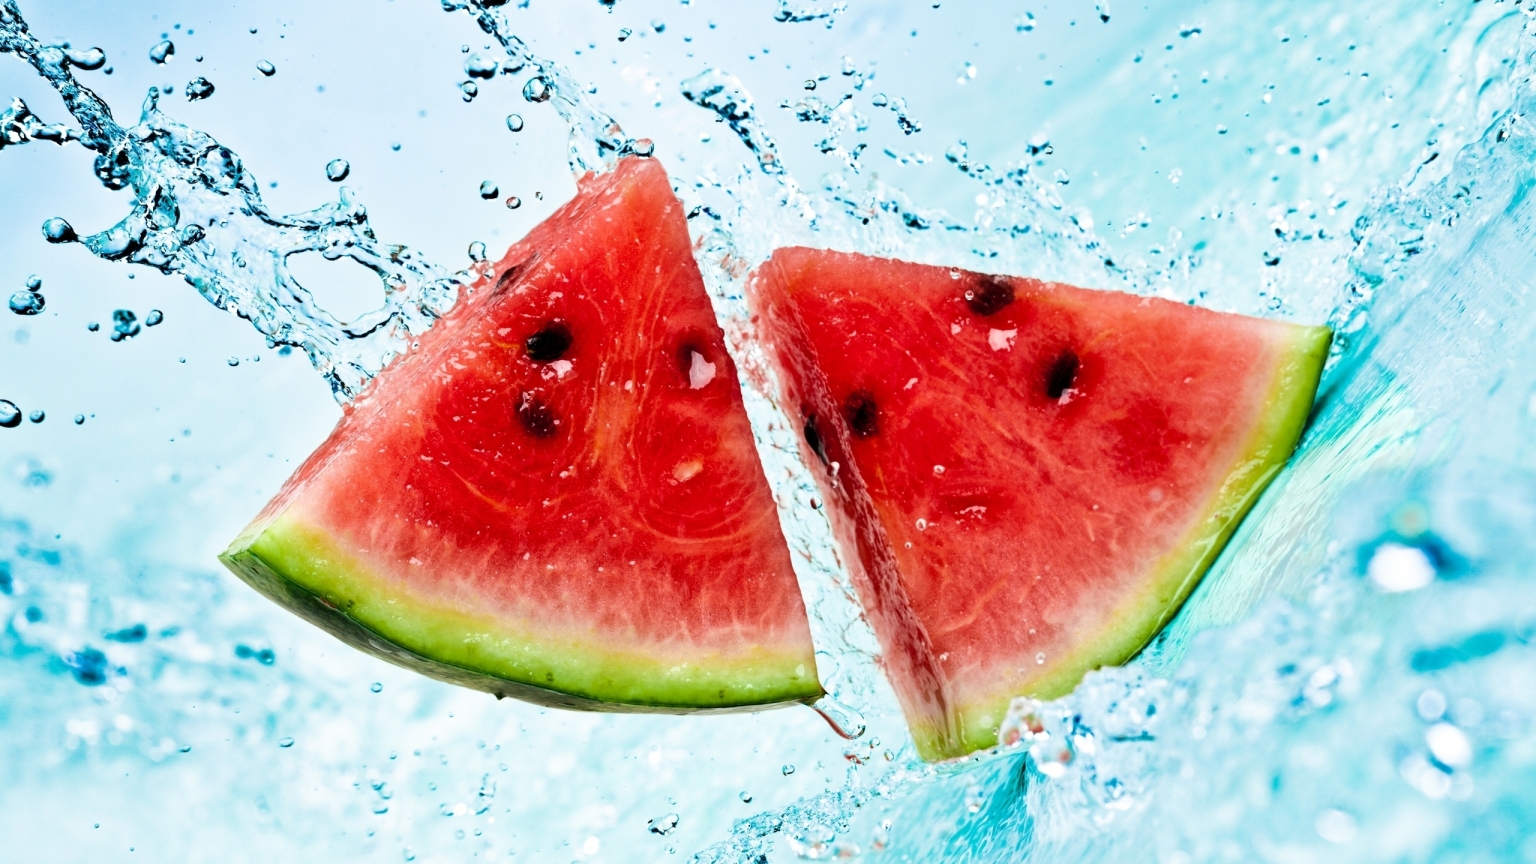 Watermelon Slices for 1536 x 864 HDTV resolution